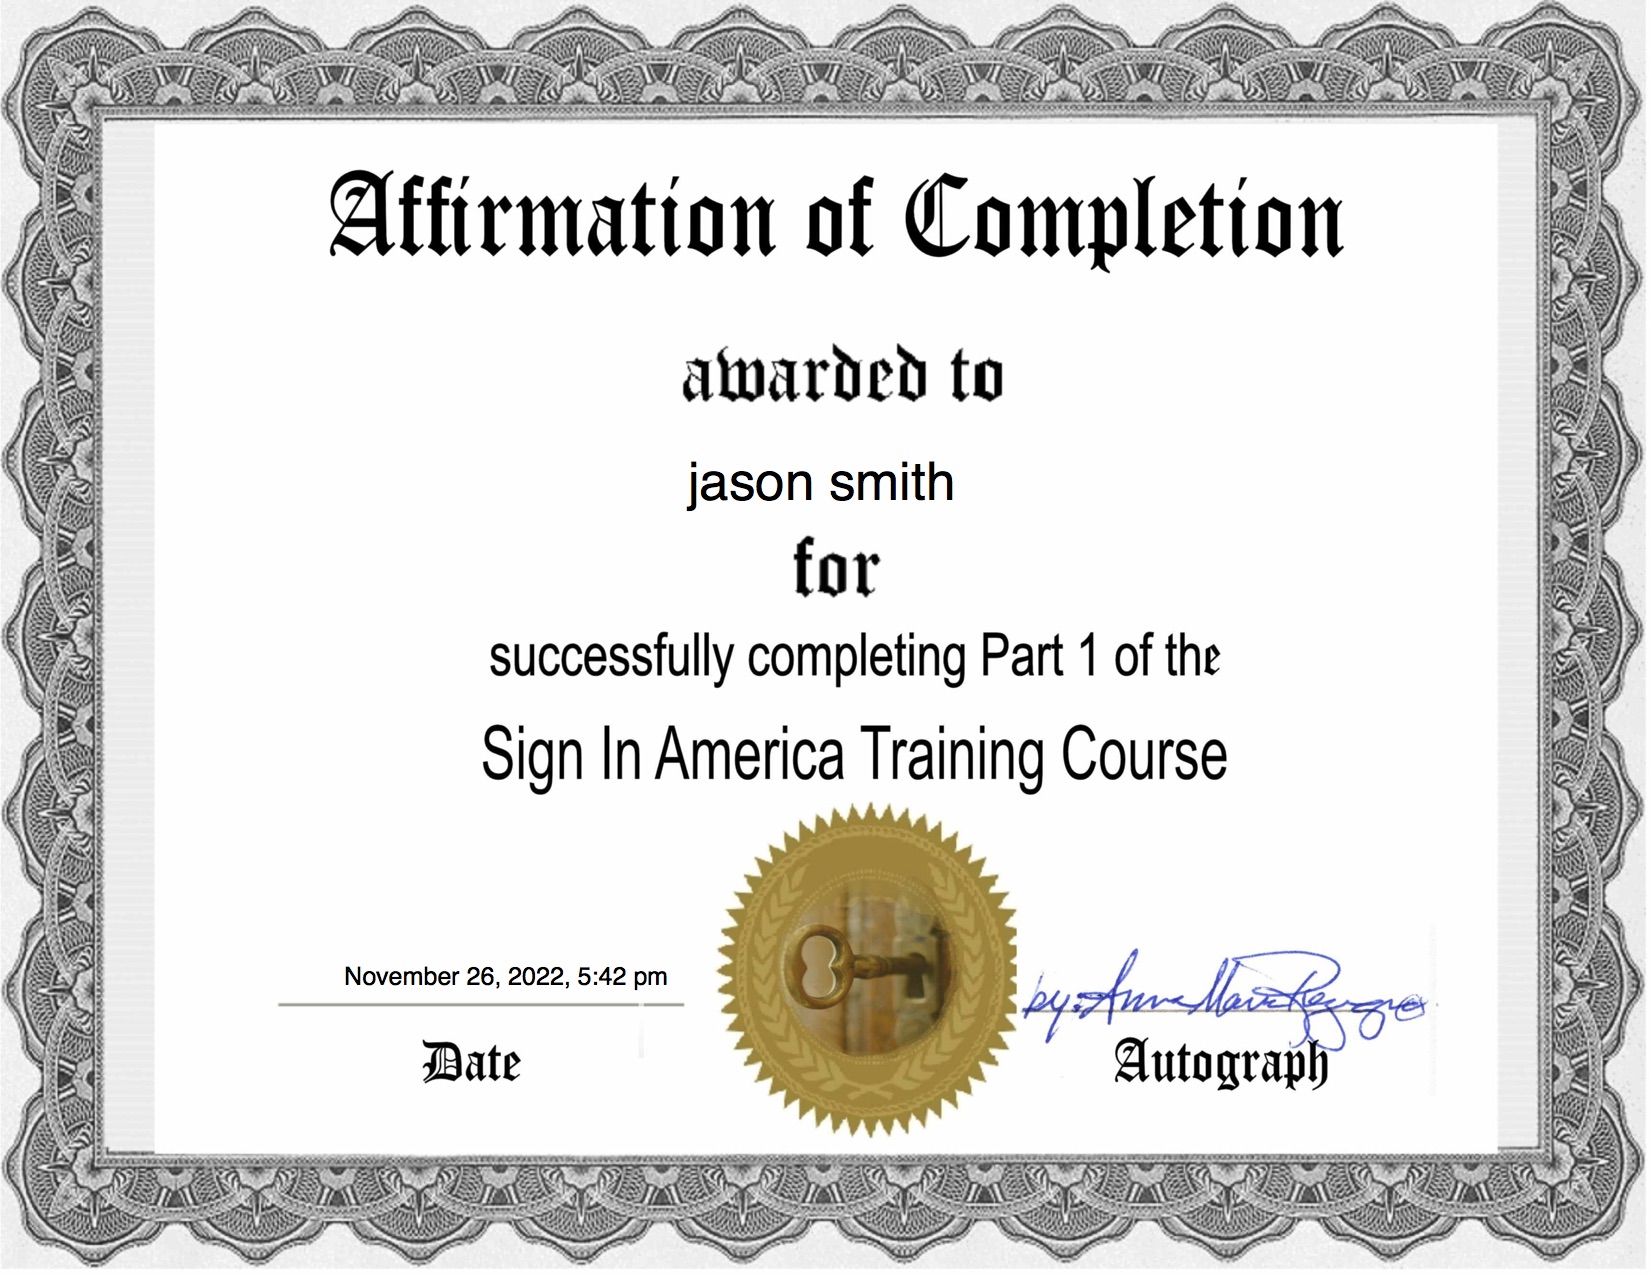 jason-smith-Section-4-Enforcement-Part-8-Affirmation-of-Completion-Sign-In-America-8211-Study-Course